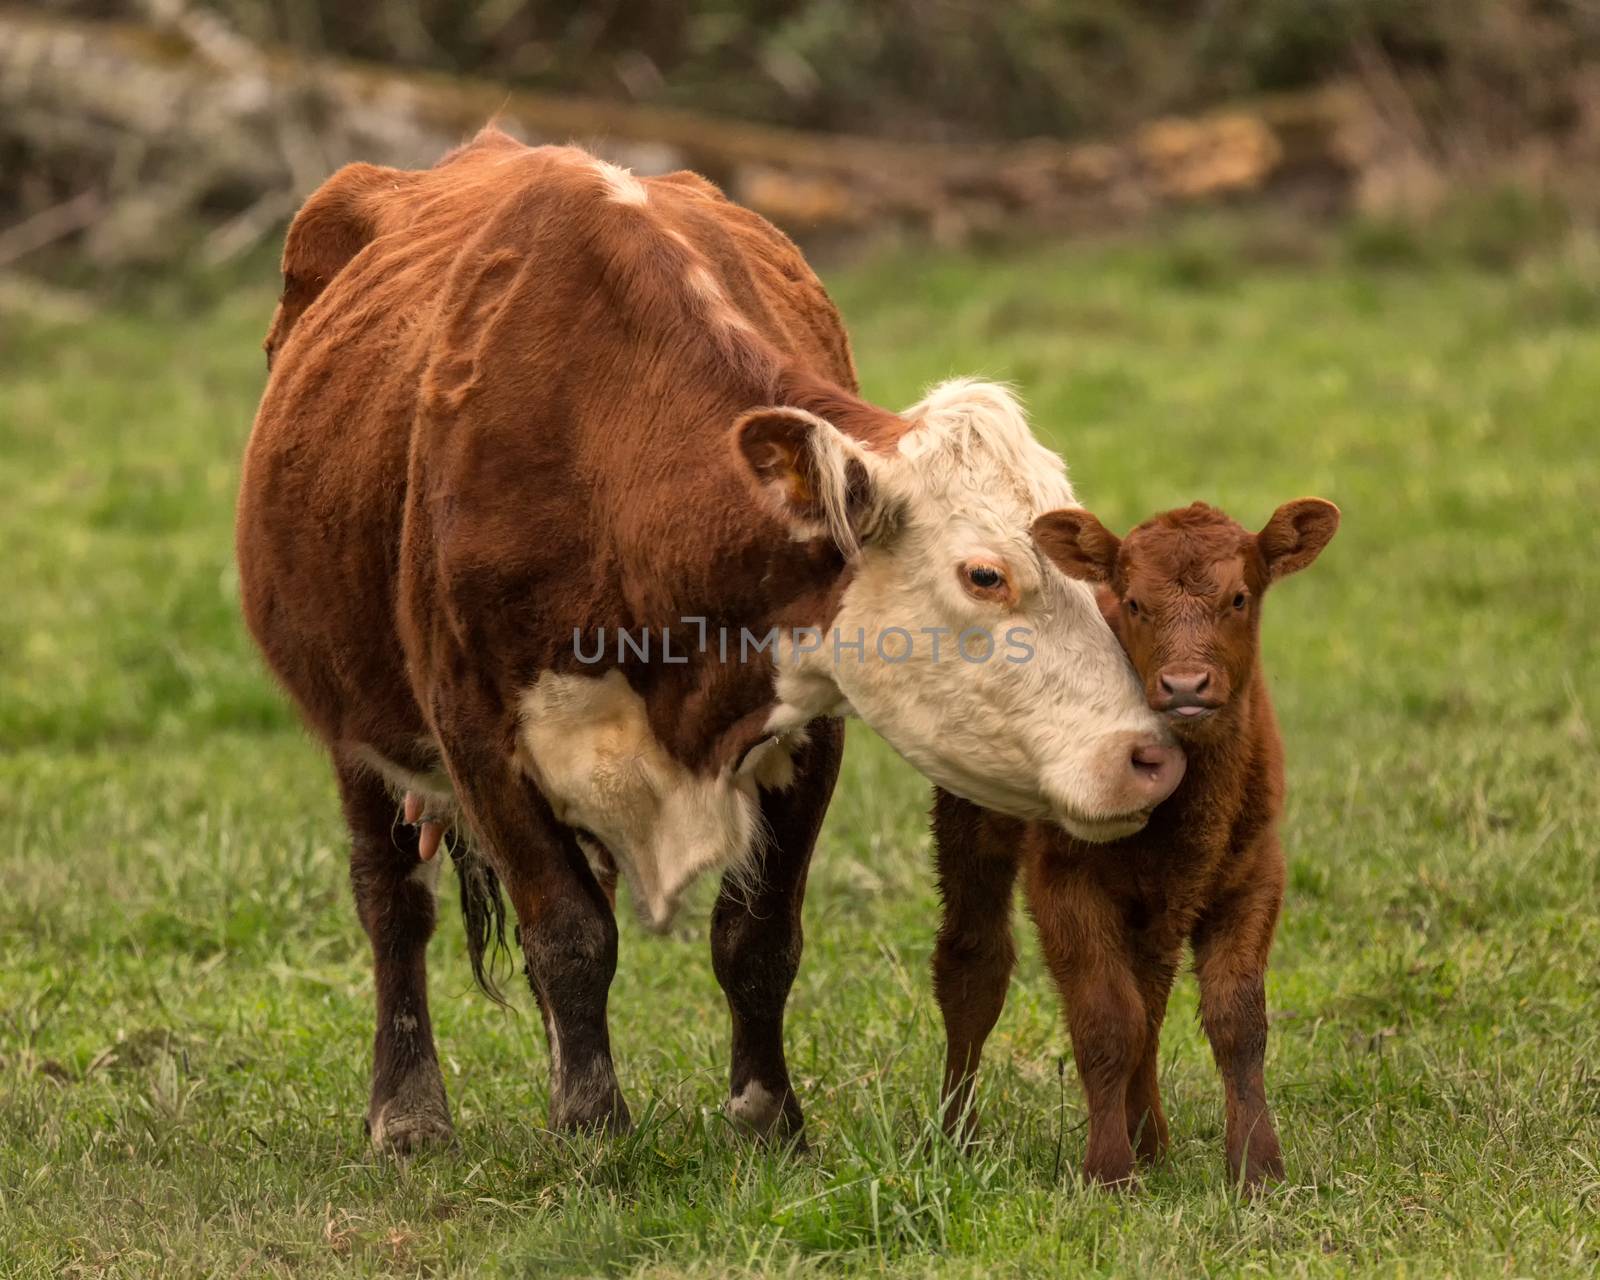 Momma Cow and Calf by backyard_photography